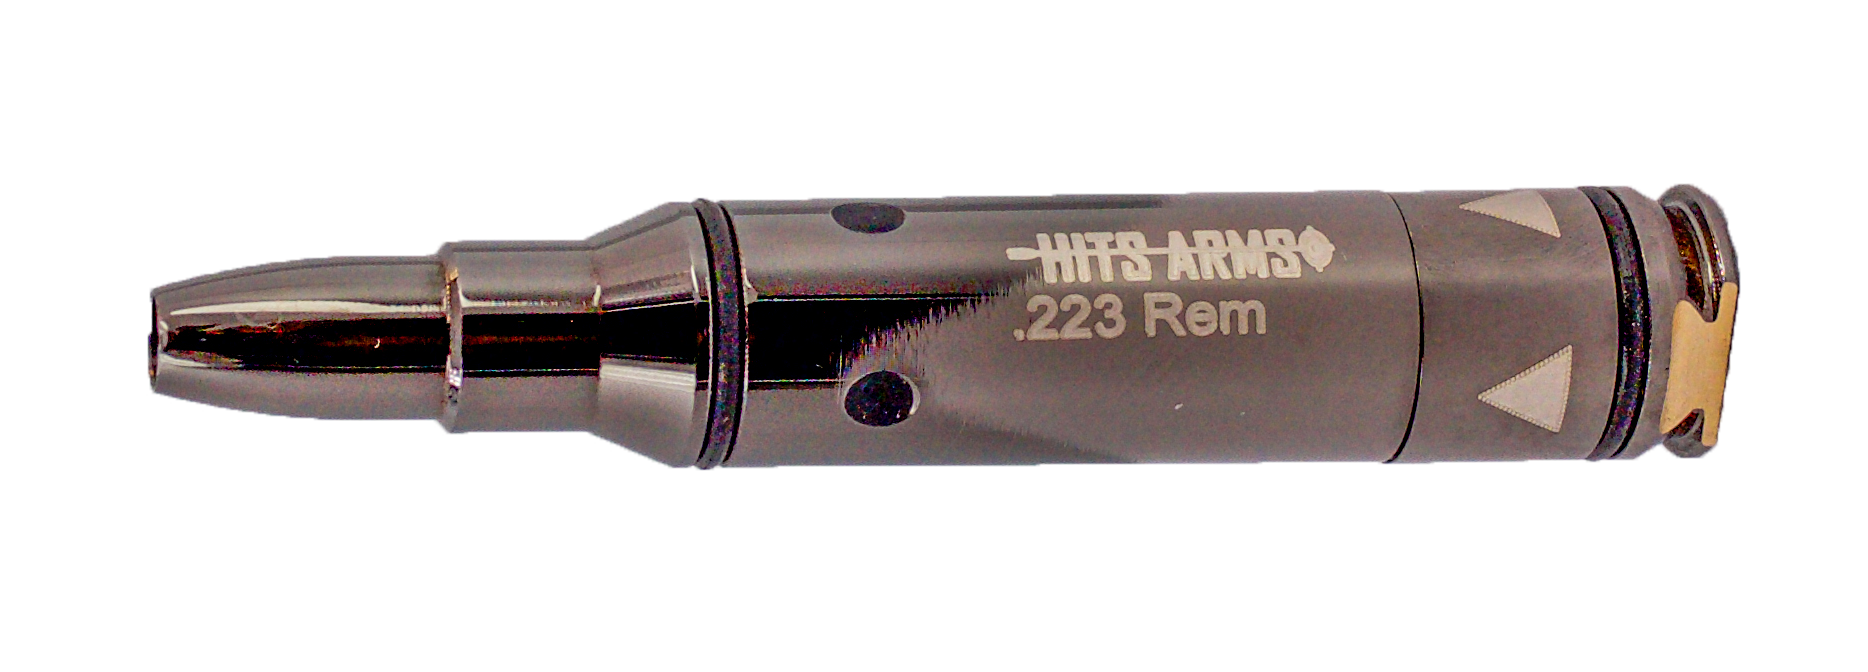 Hits Arms Laser Bullet Gen 3 for Dry Fire Training not itarget gsight laserammo 